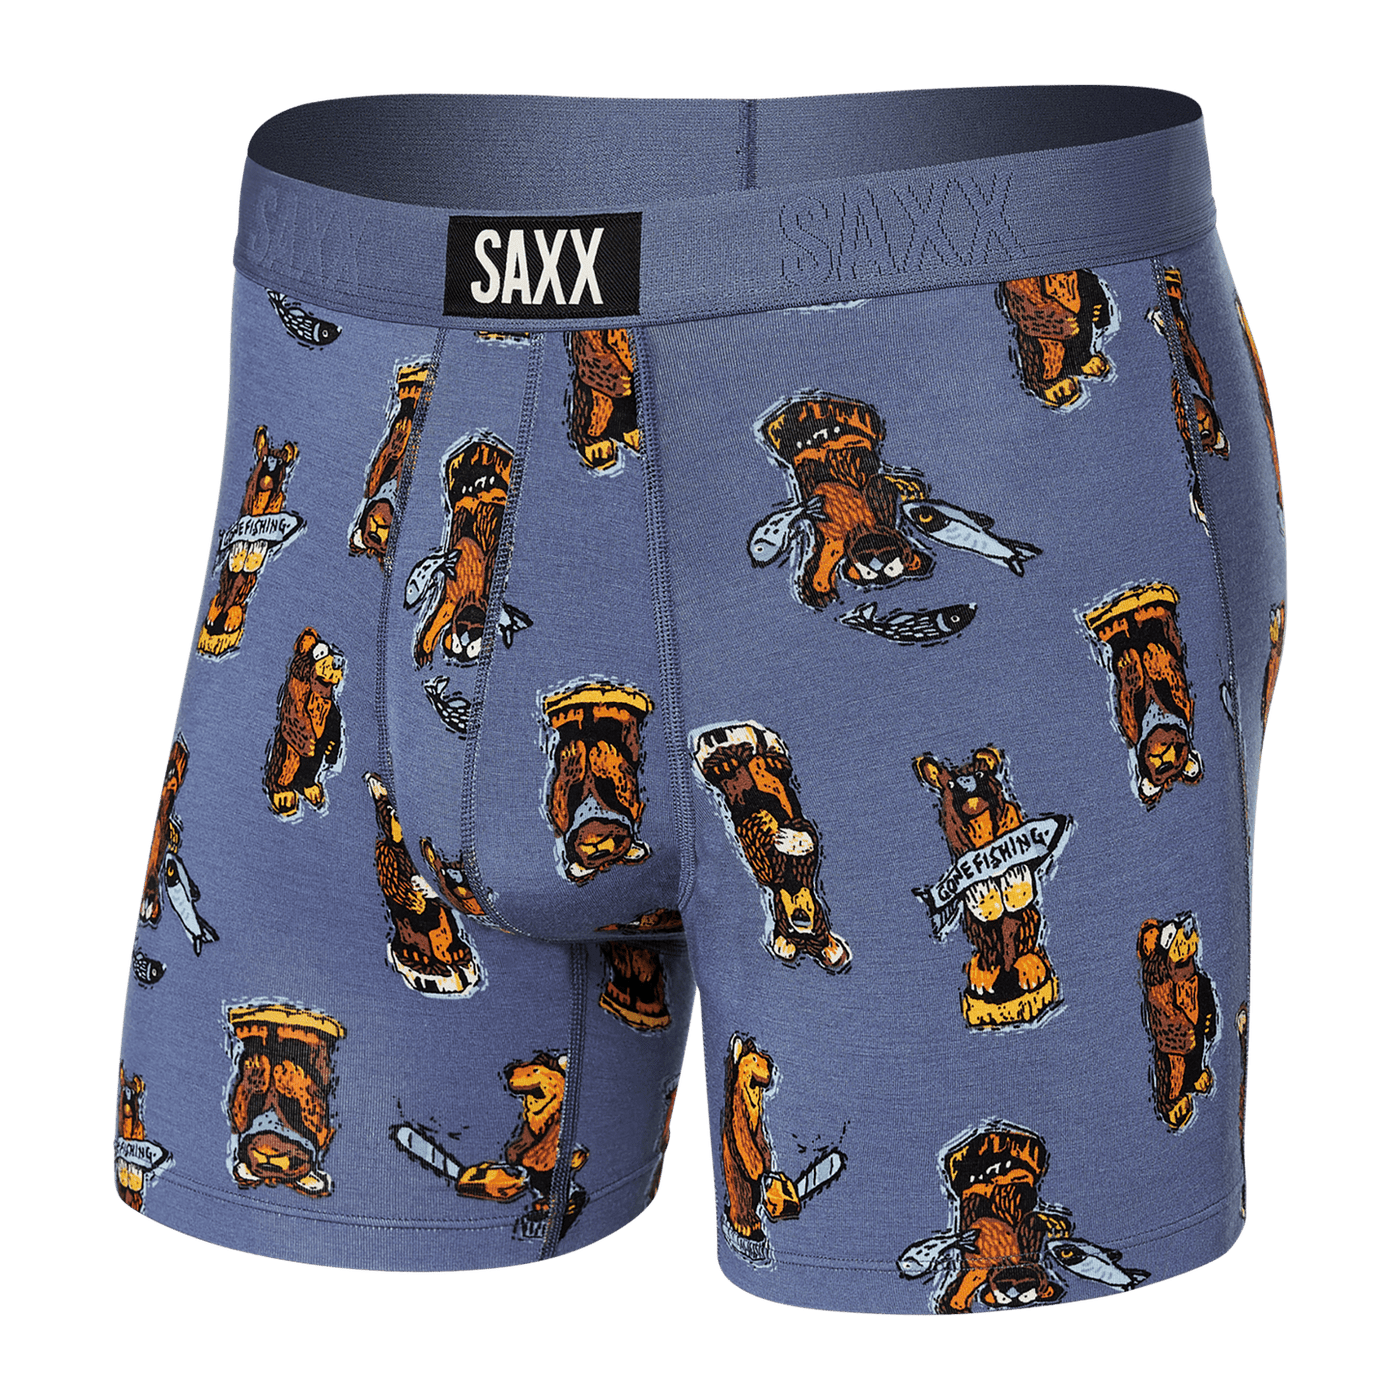 Saxx Vibe Boxers - Stumpy-Blue - The Hockey Shop Source For Sports